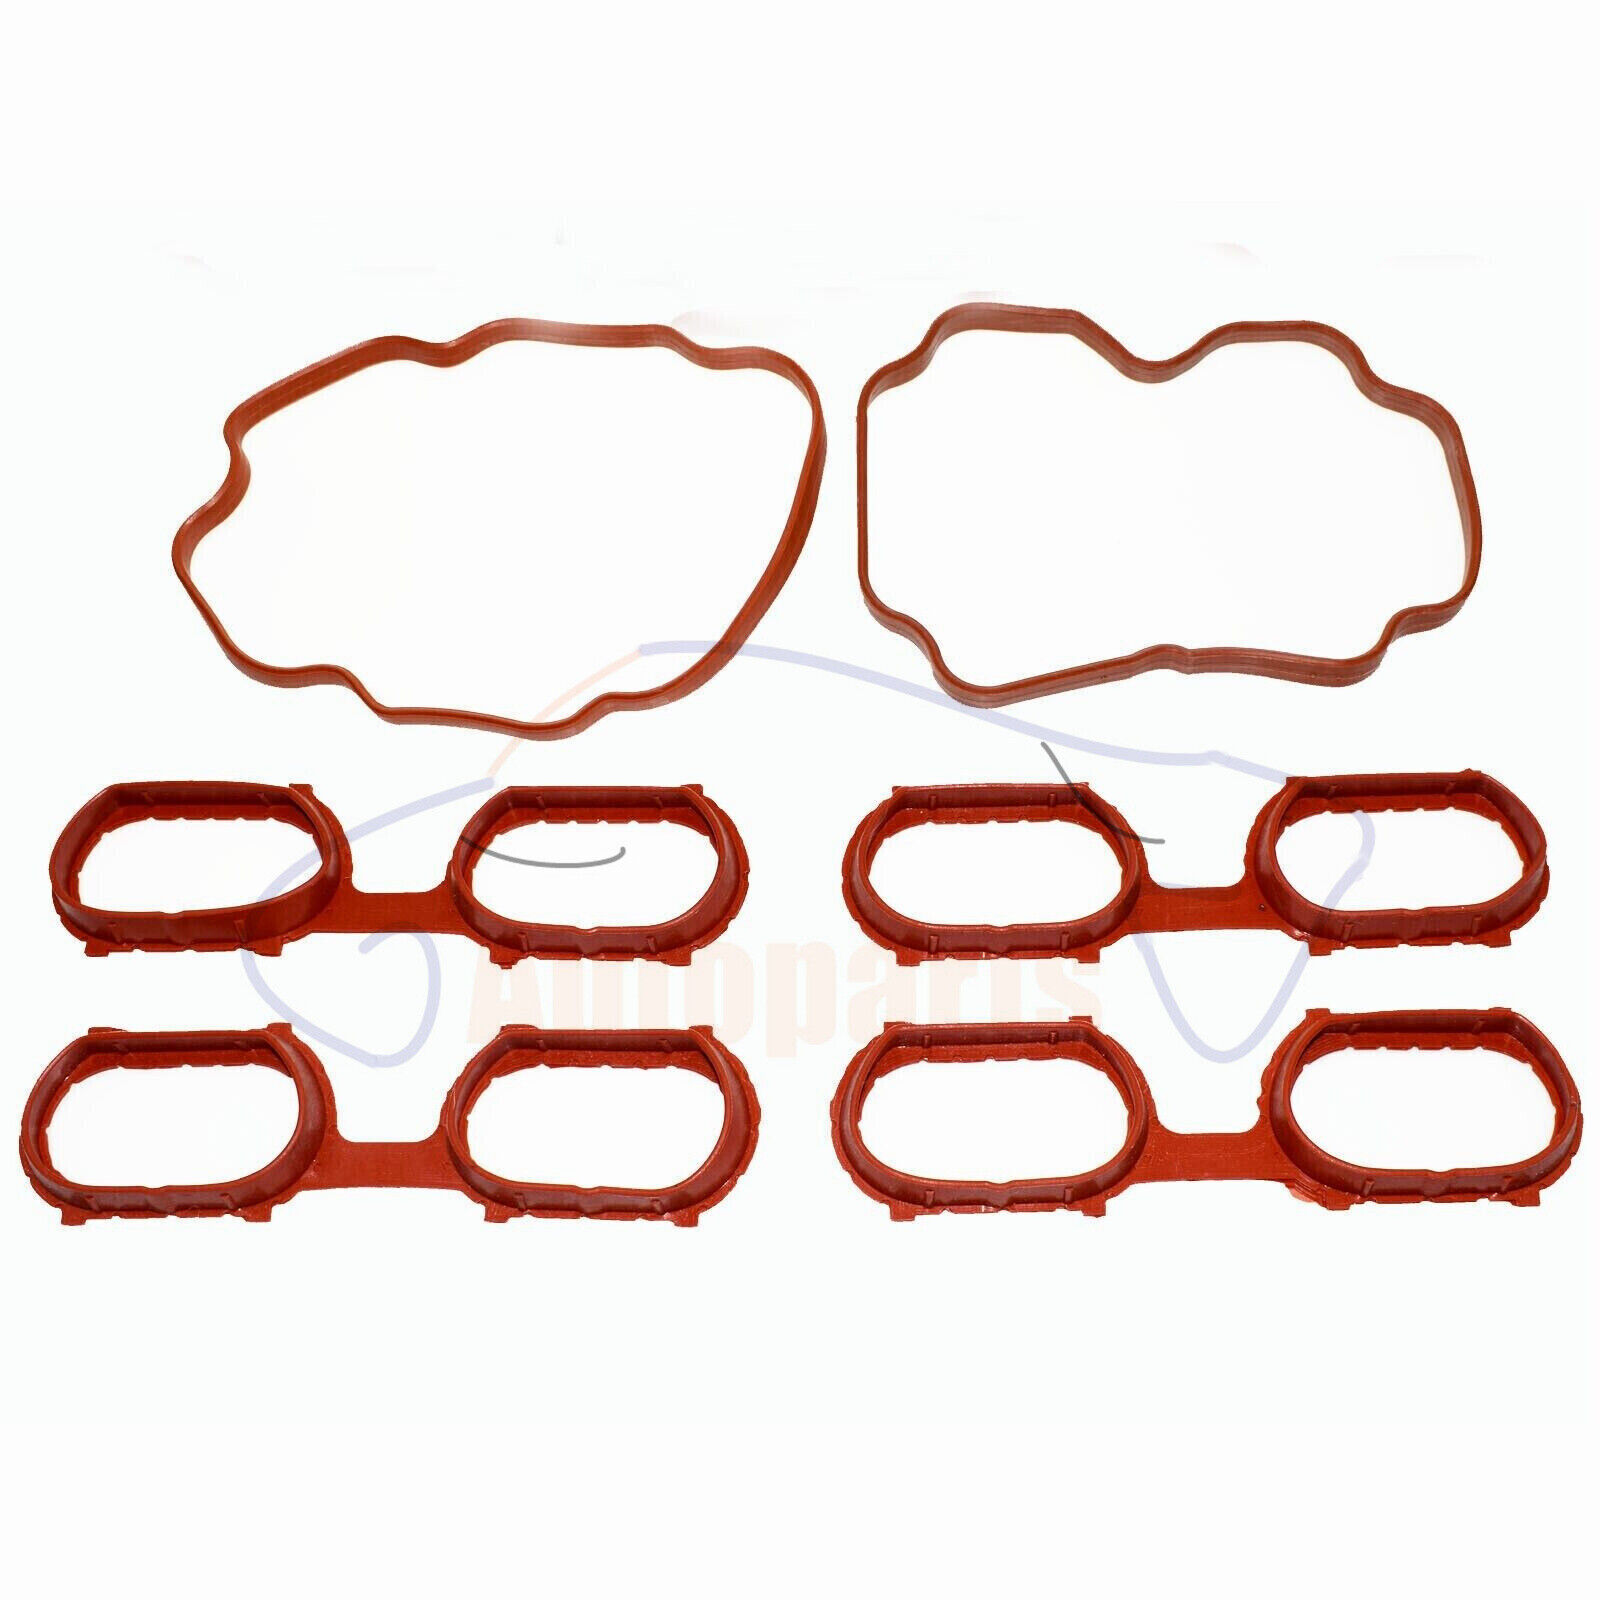 Intake Manifold Gasket For BMW 540i X5 740iL 840Ci Land Rover Range Rover 4.4L